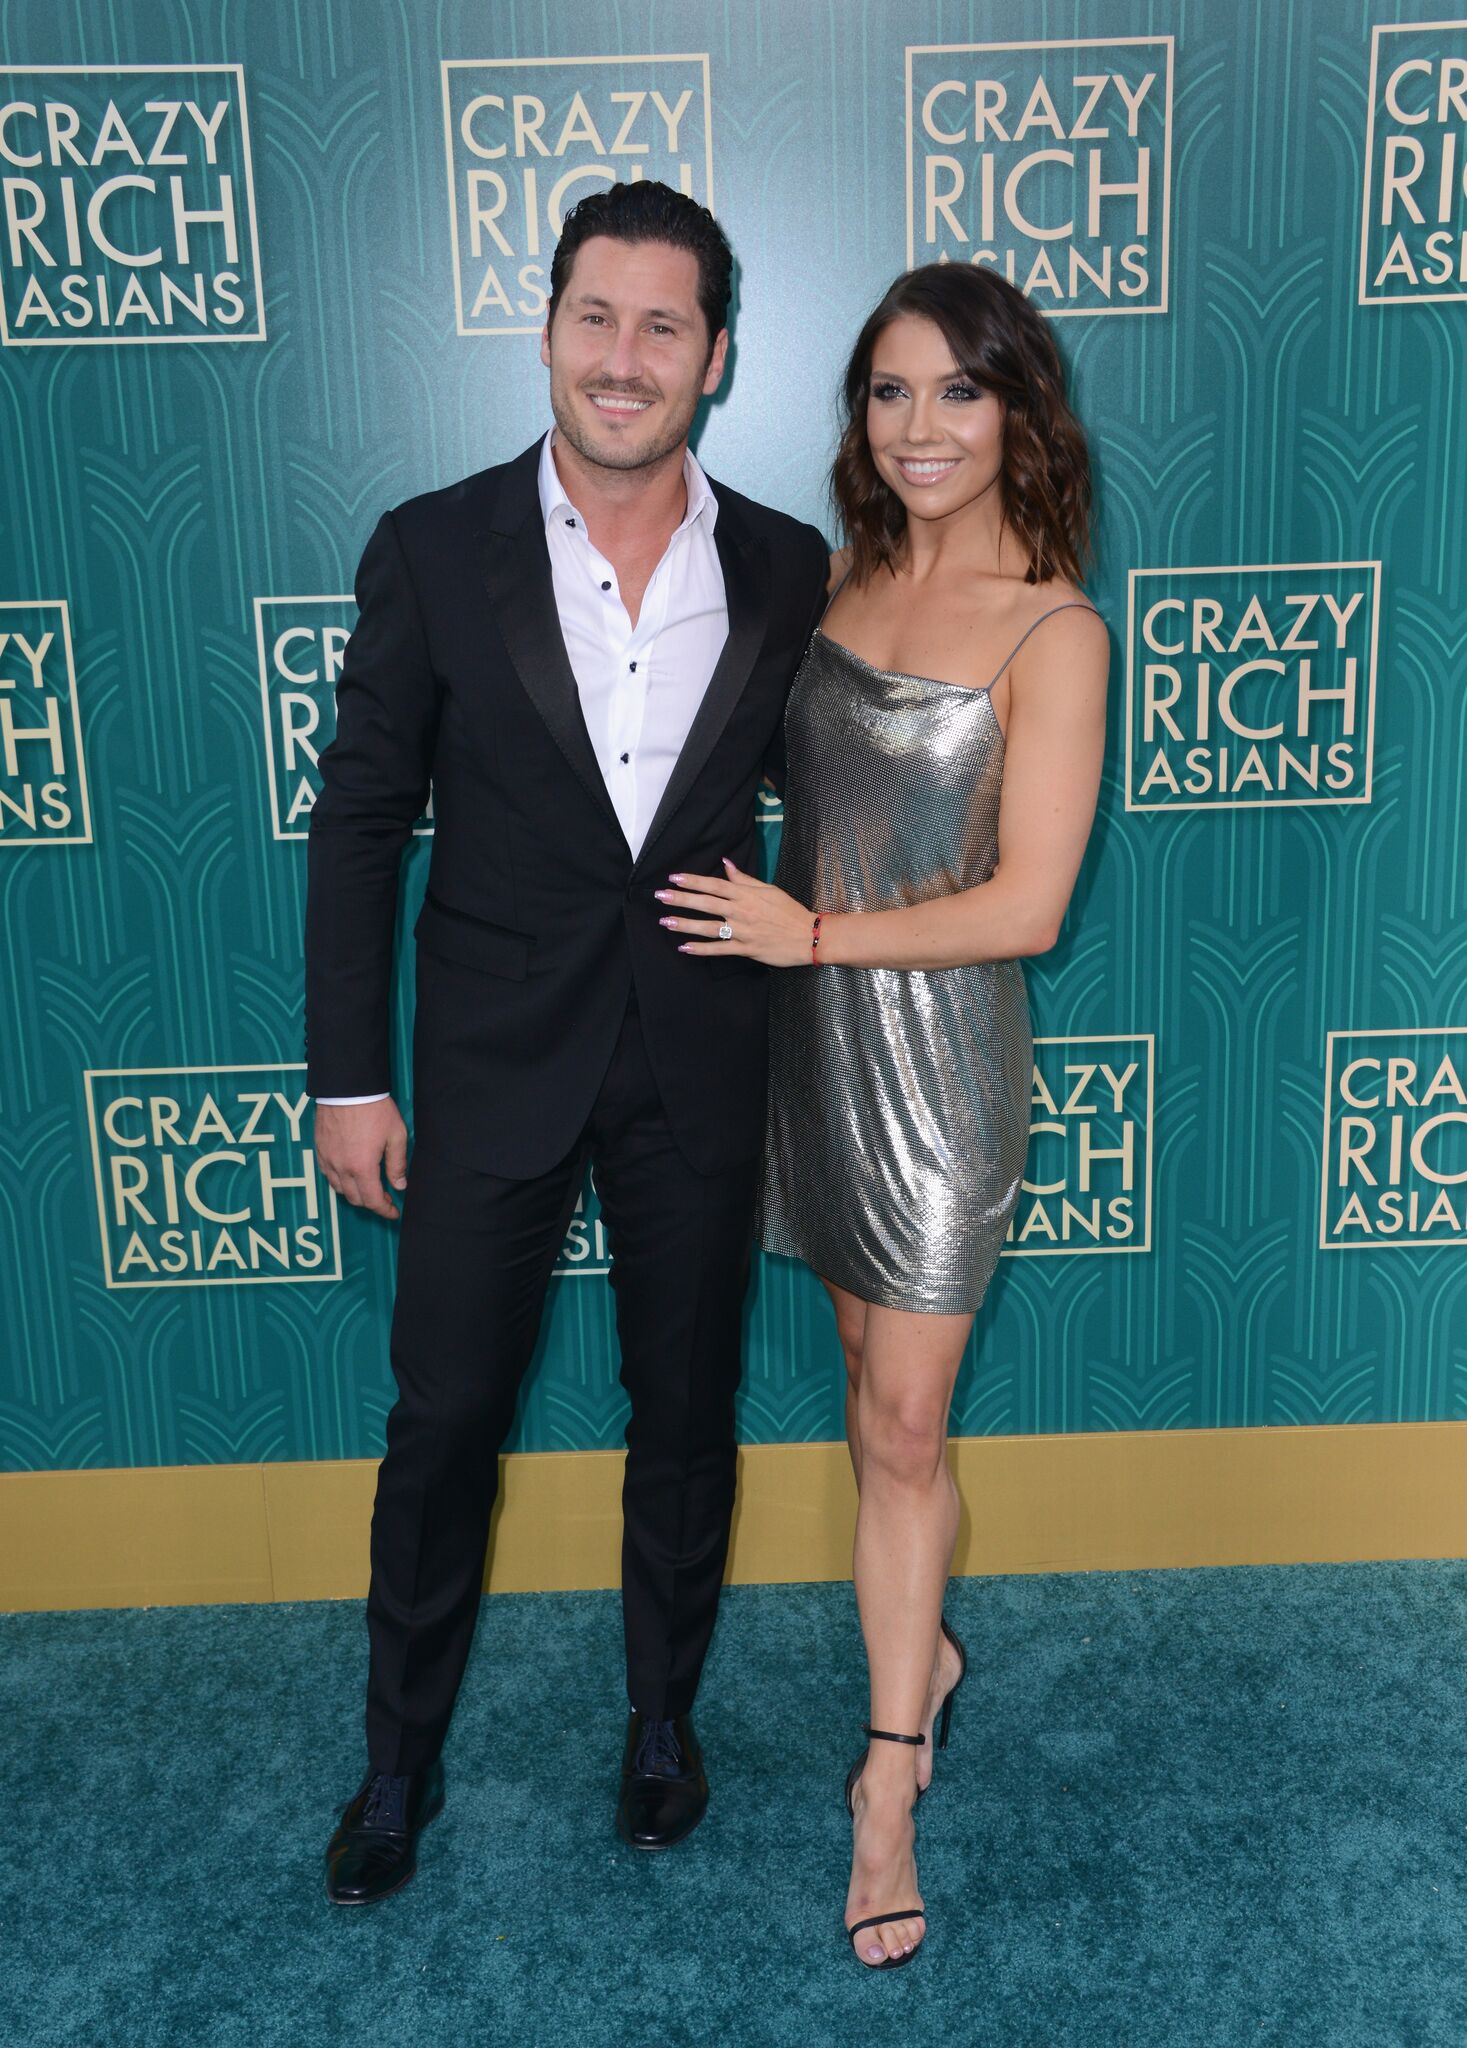  Valentin Chmerkovskiy and Jenna Johnson arrive for Warner Bros. Pictures' "Crazy Rich Asians" Premiere held at TCL Chinese Theatre IMAX | Getty Images